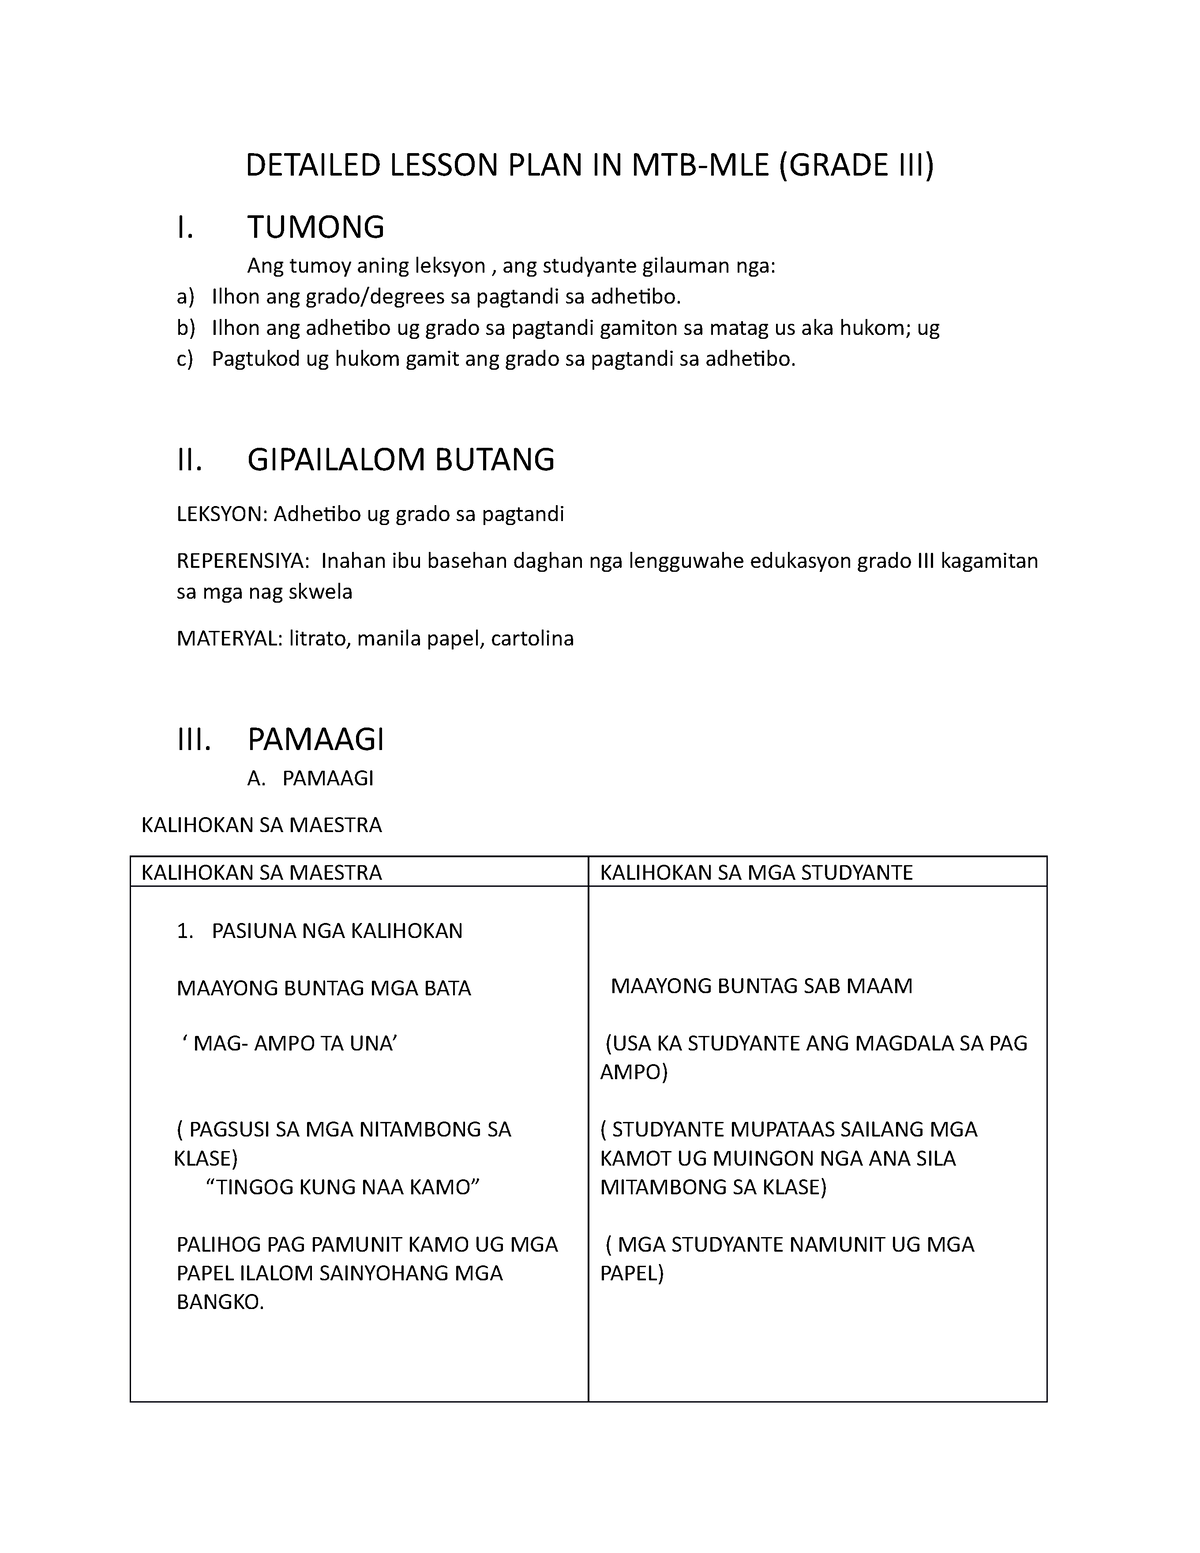 Detailed Lesson Plan In Mtb Detailed Lesson Plan In Mtb Mle Grade Iii I Tumong Ang Tumoy 4344